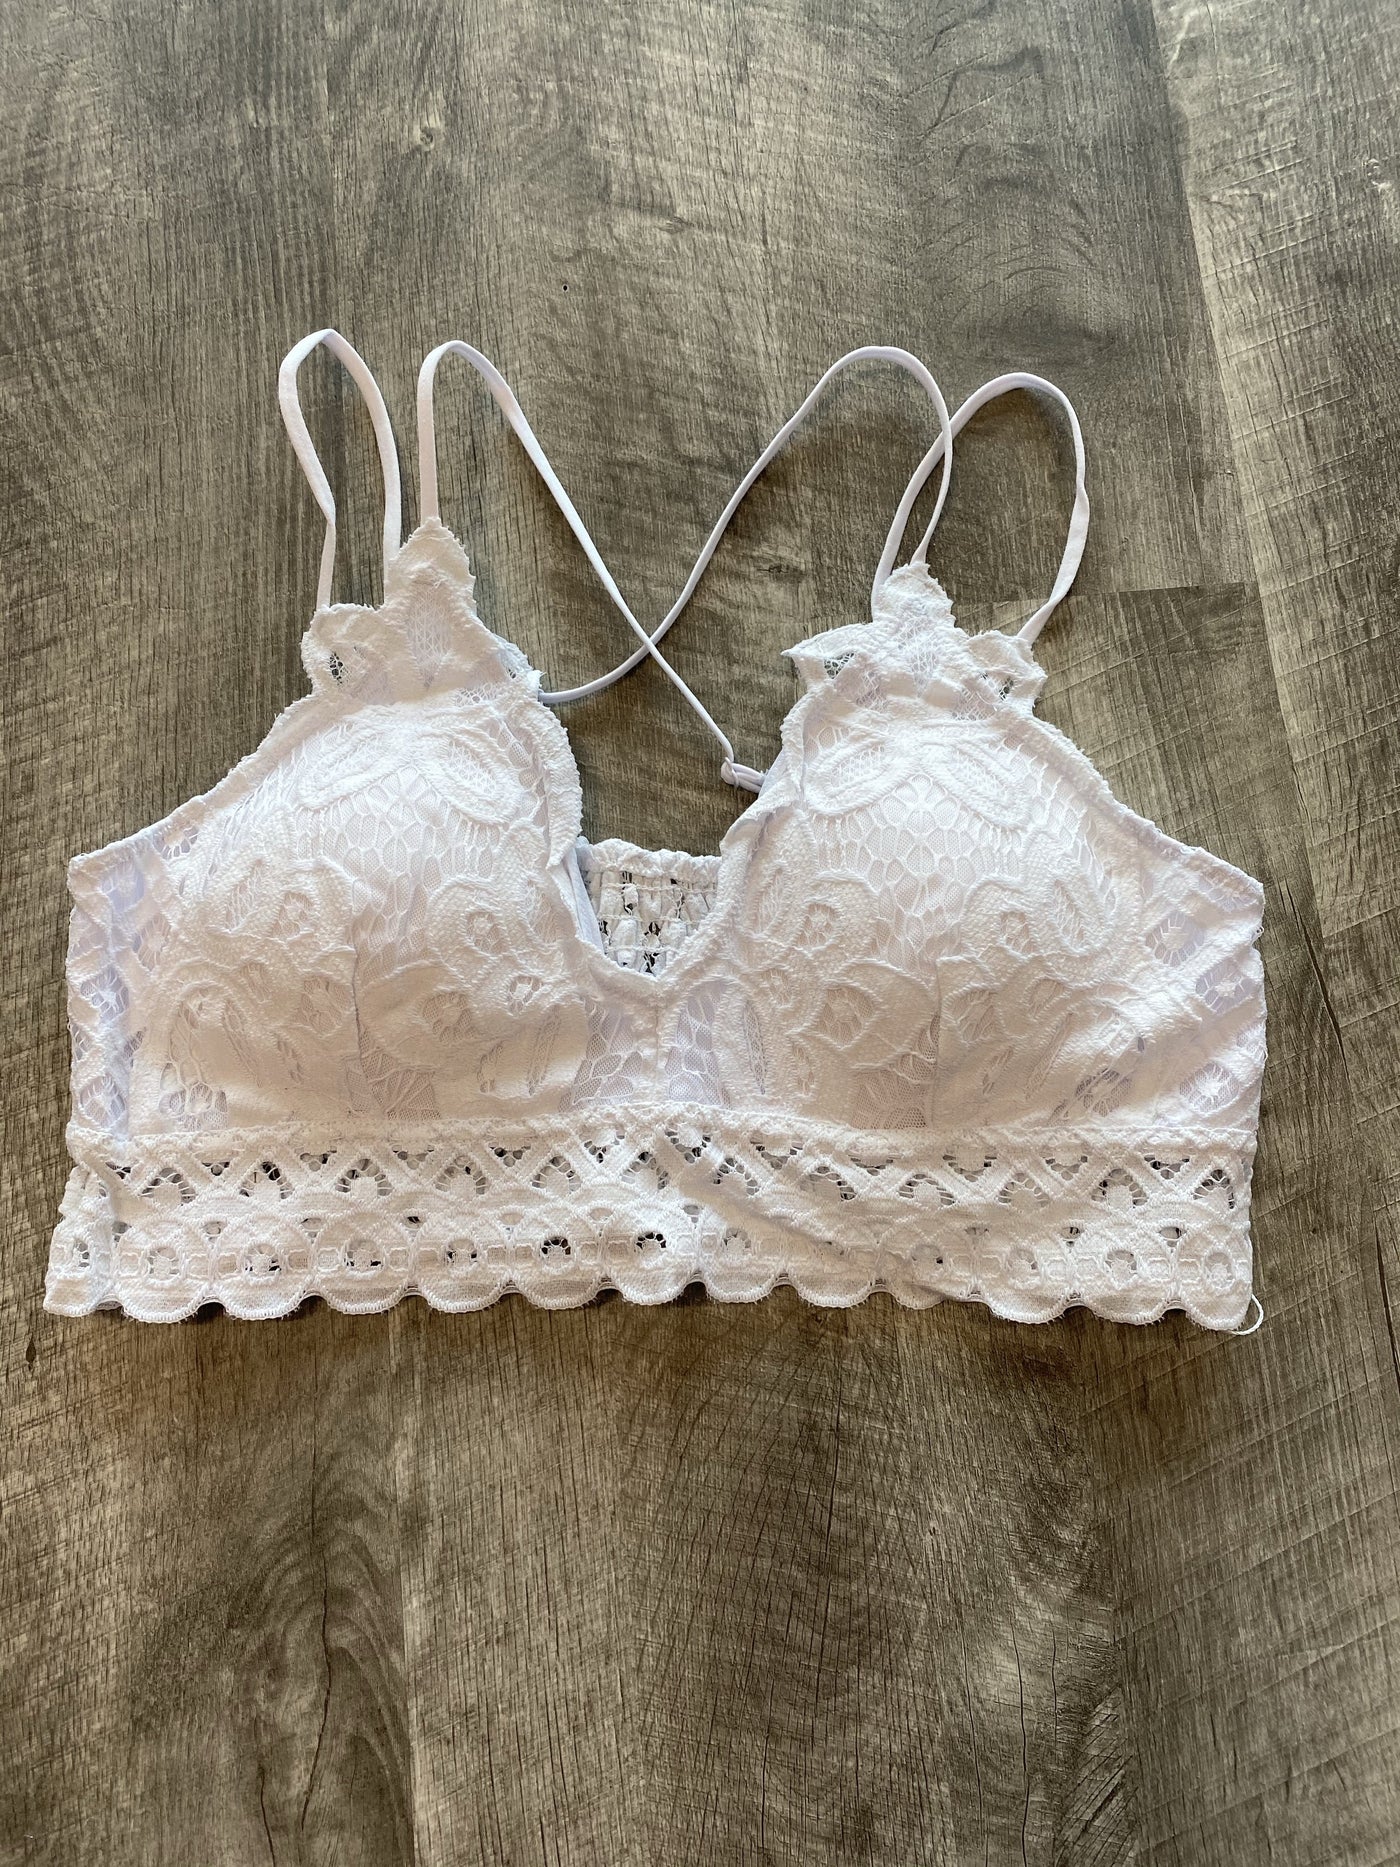 Crochet Lace Bralette In White - The Teal Turtle Clothing Company